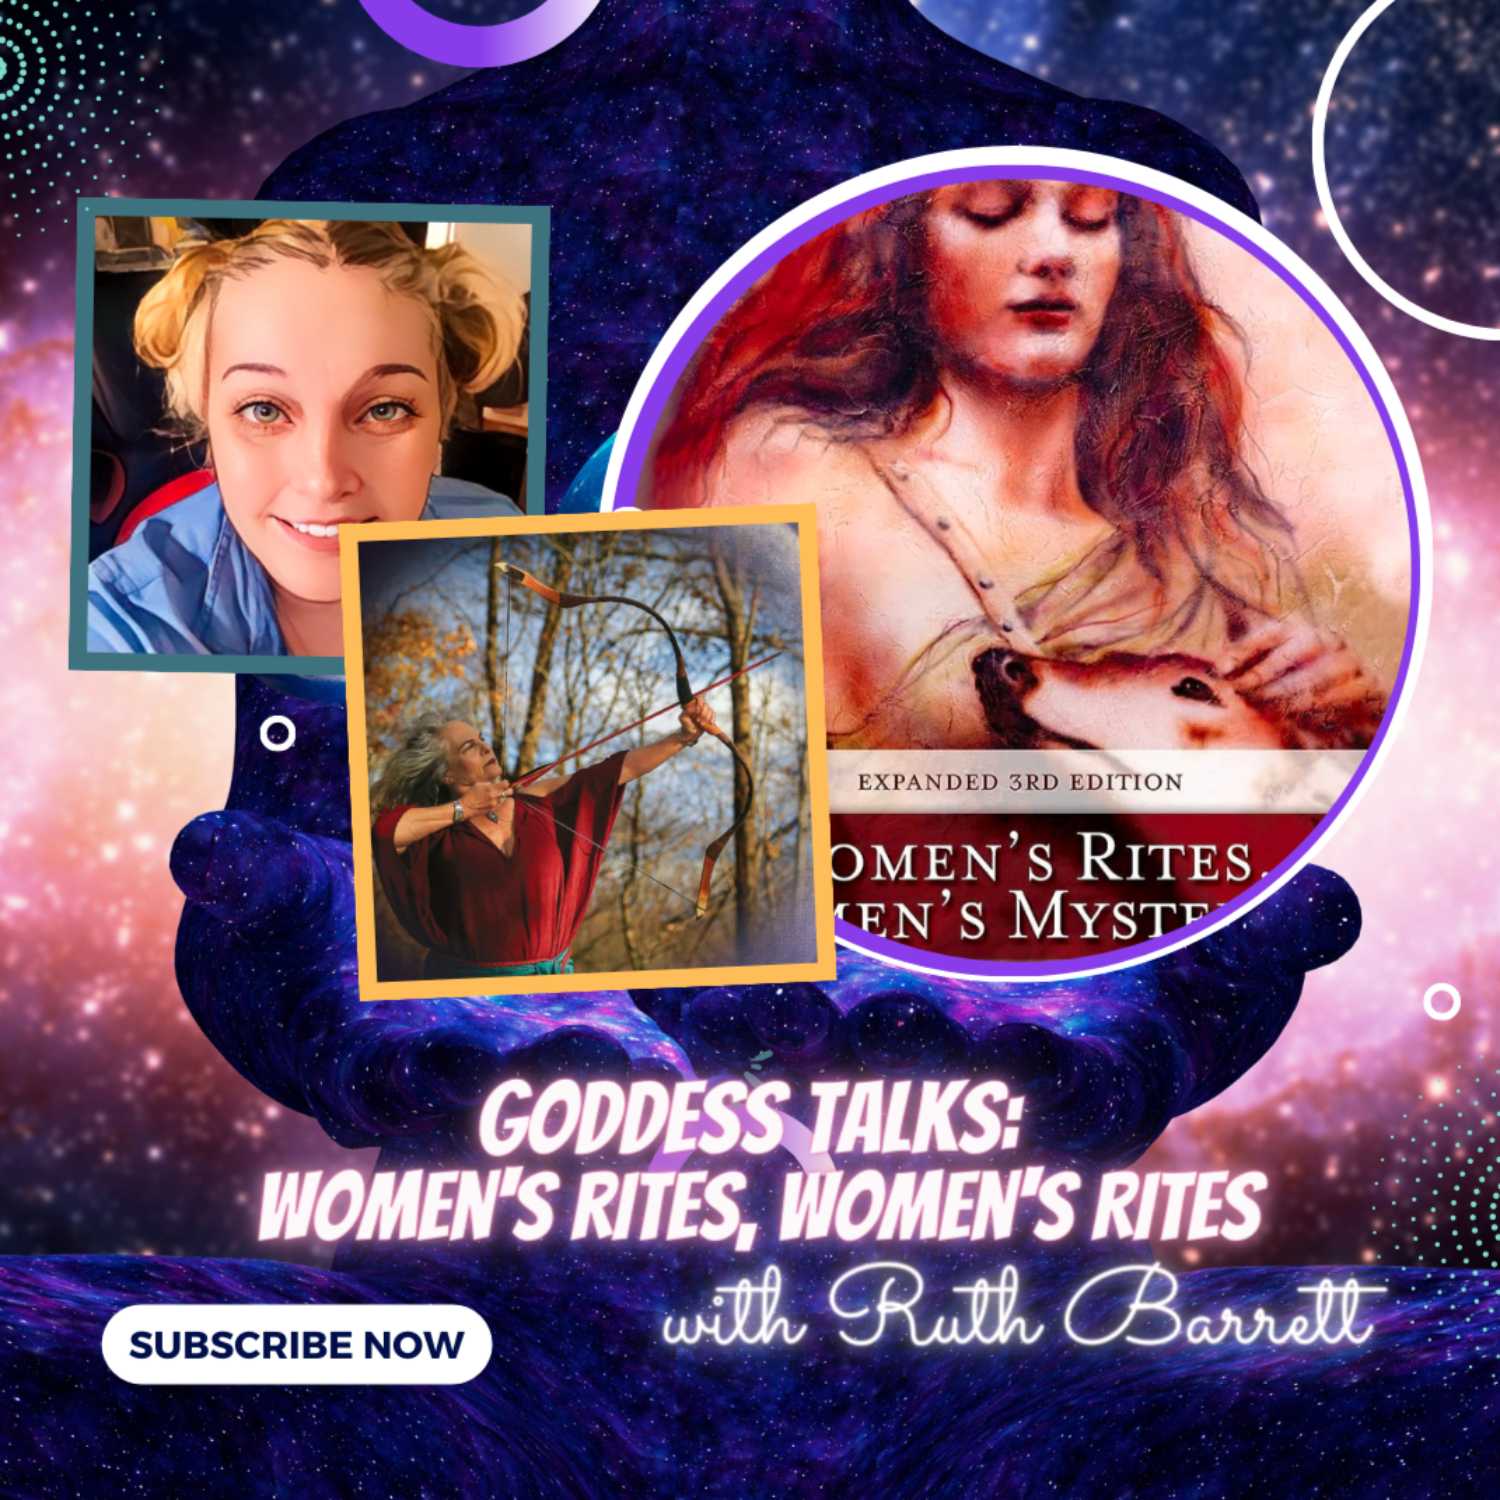 GODDESS TALKS: Dianic Wicca and Women’s Rites - with Ruth Barrett